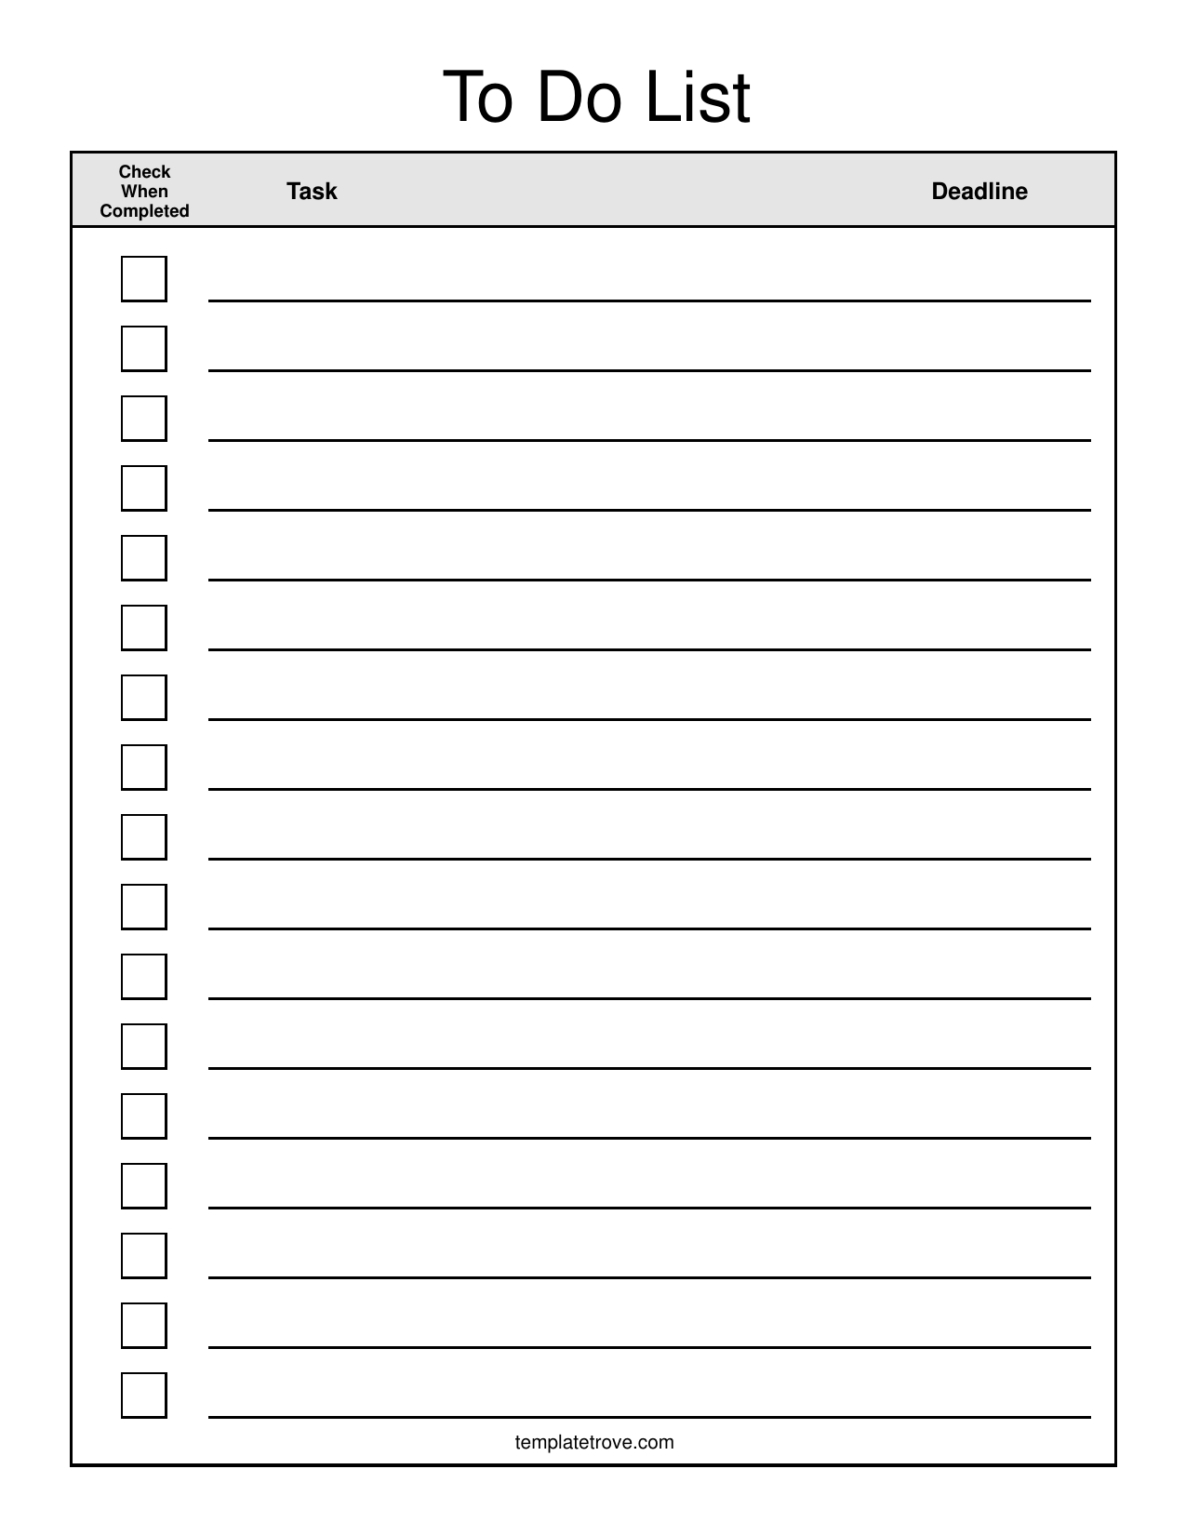 Download To-Do Checklist Template | Excel | Pdf | Rtf in Blank To Do List Template